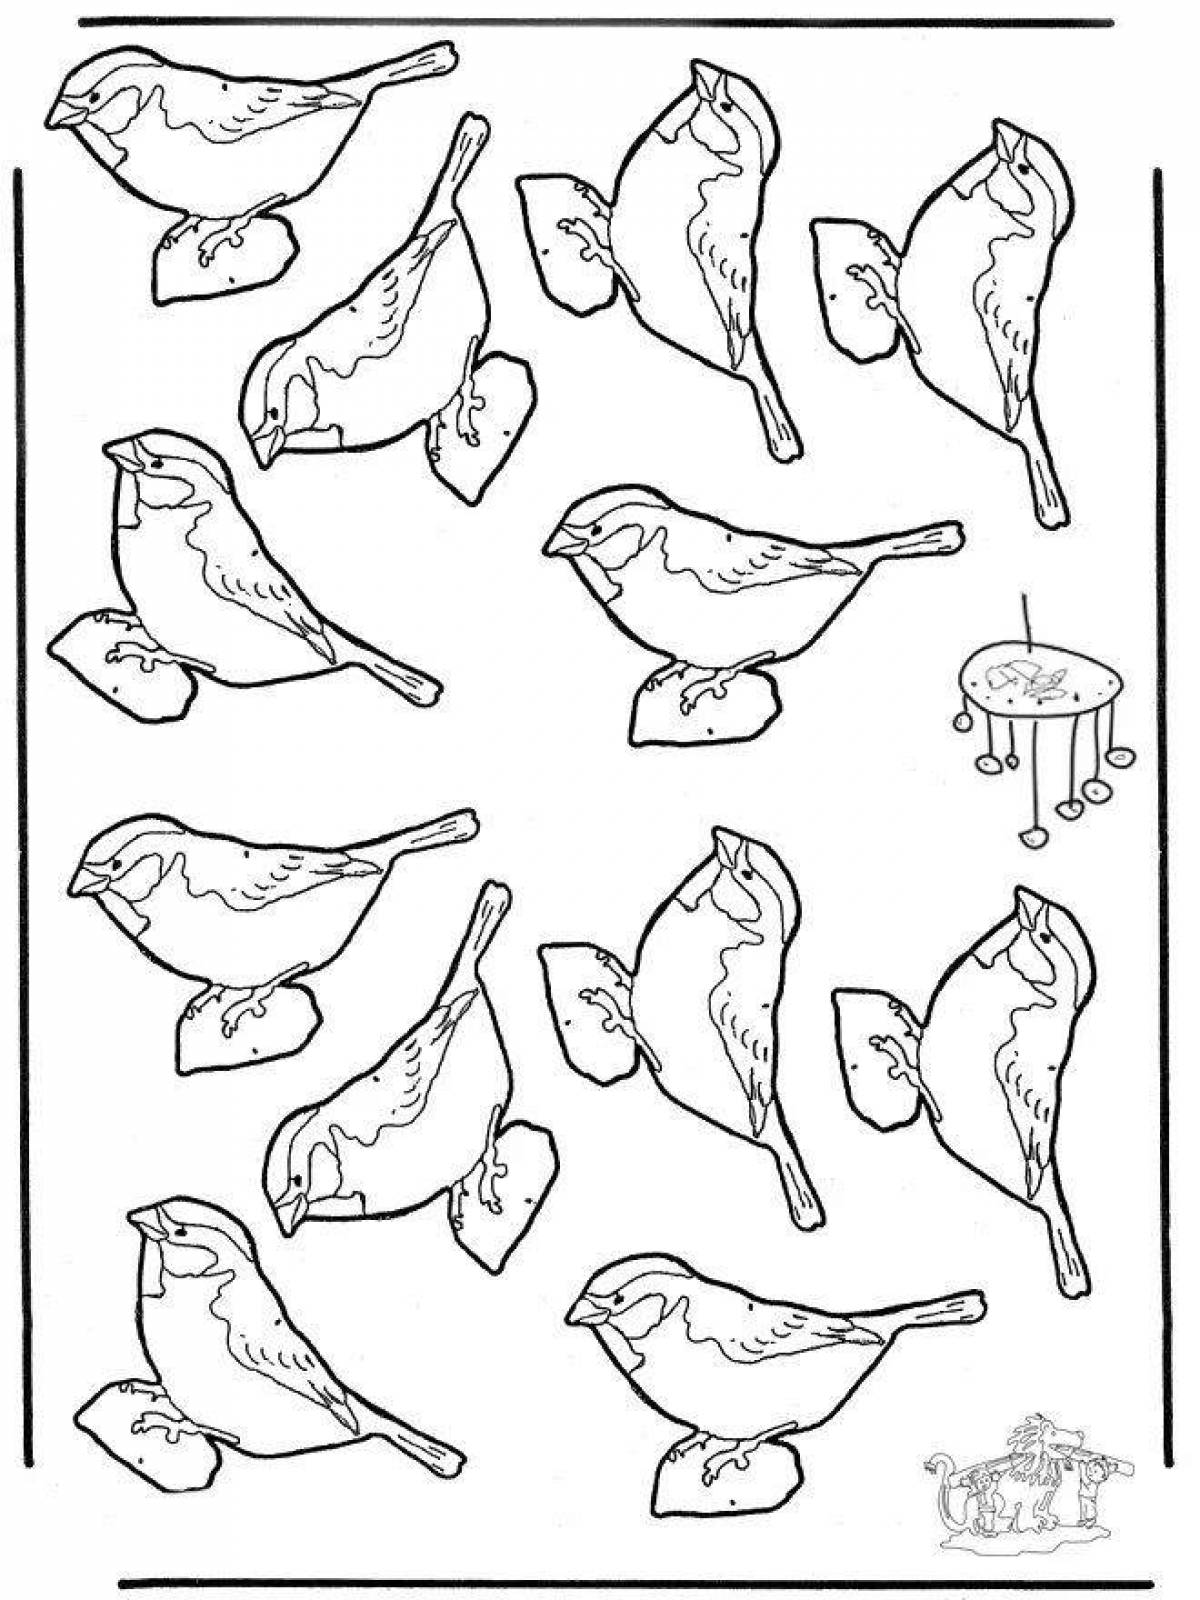 Amazing coloring pages of wintering birds for preschoolers